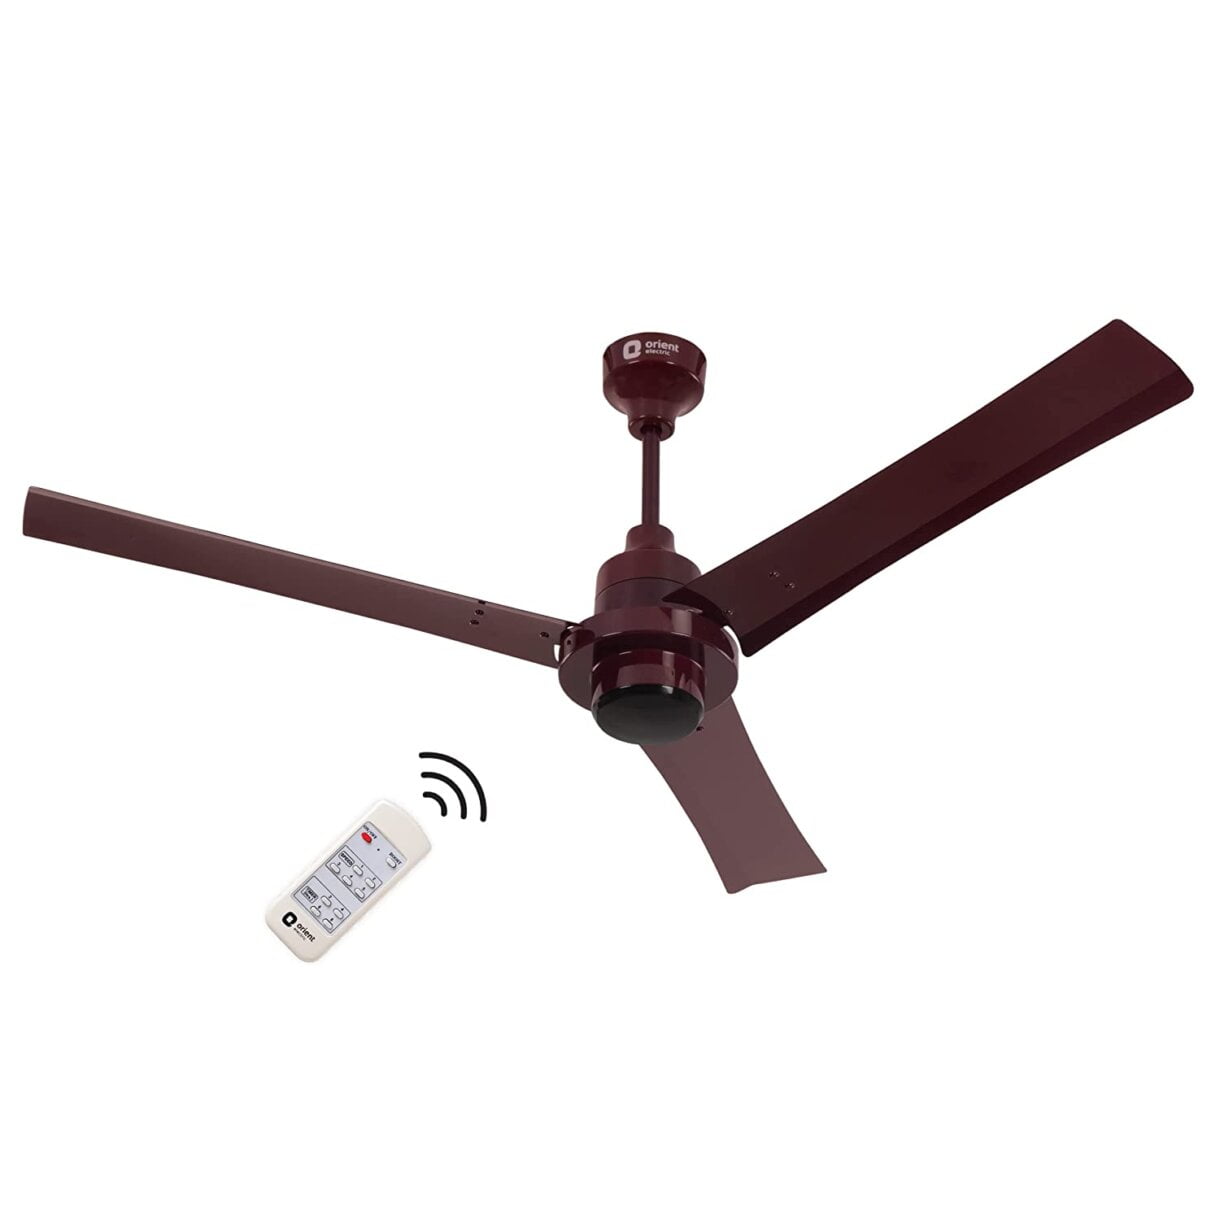 Orient Electric I-Tome 1200mm BLDC ceiling fan with Remote